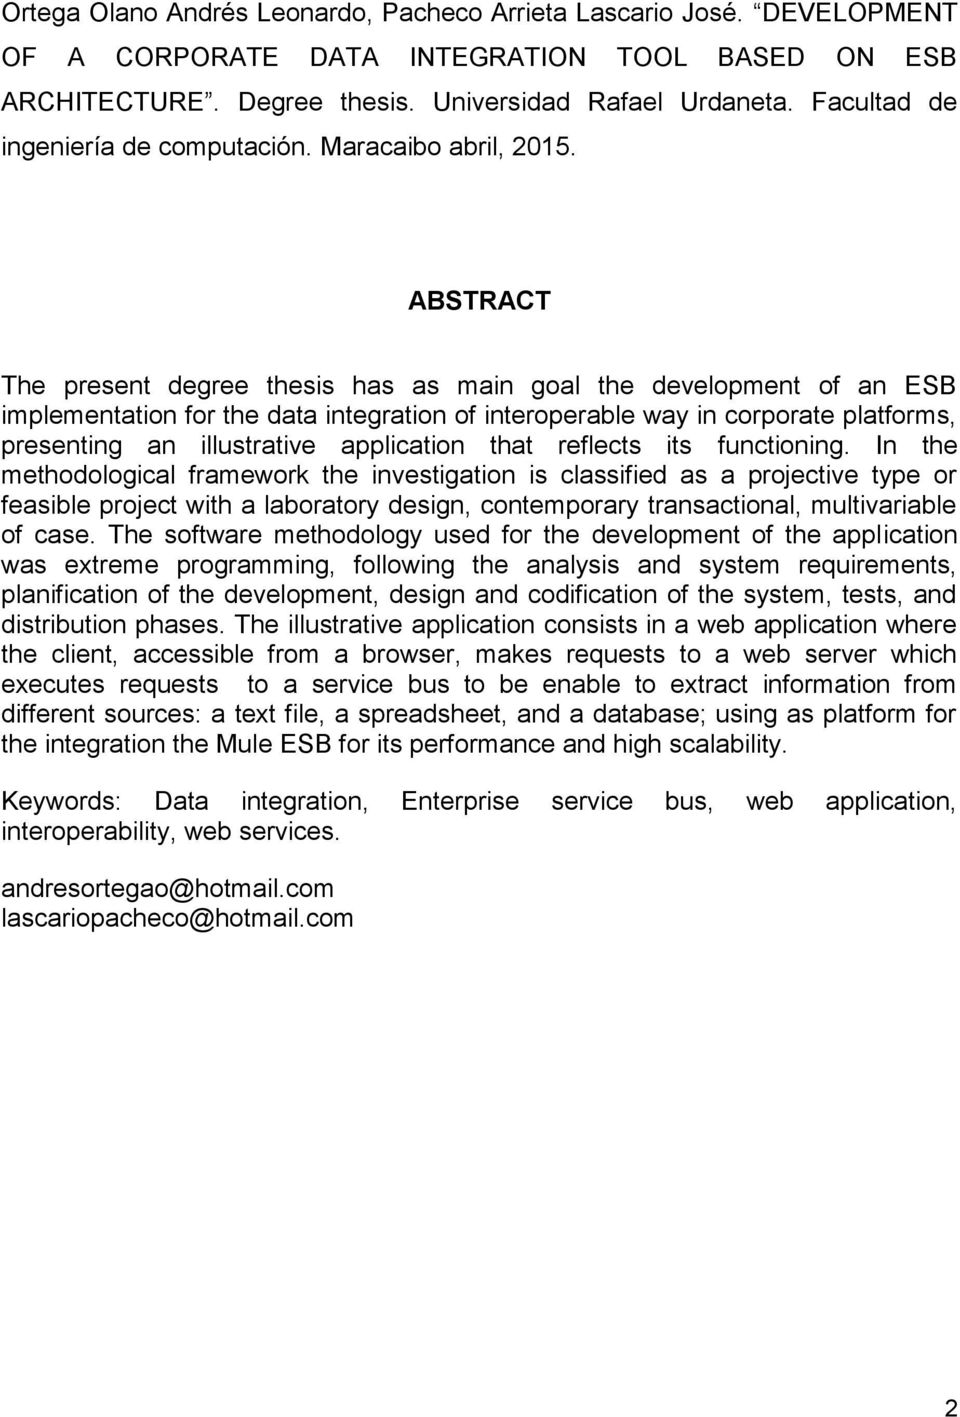 ABTAT The present degree thesis has as main goal the development of an B implementation for the data integration of interoperable way in corporate platforms, presenting an illustrative application